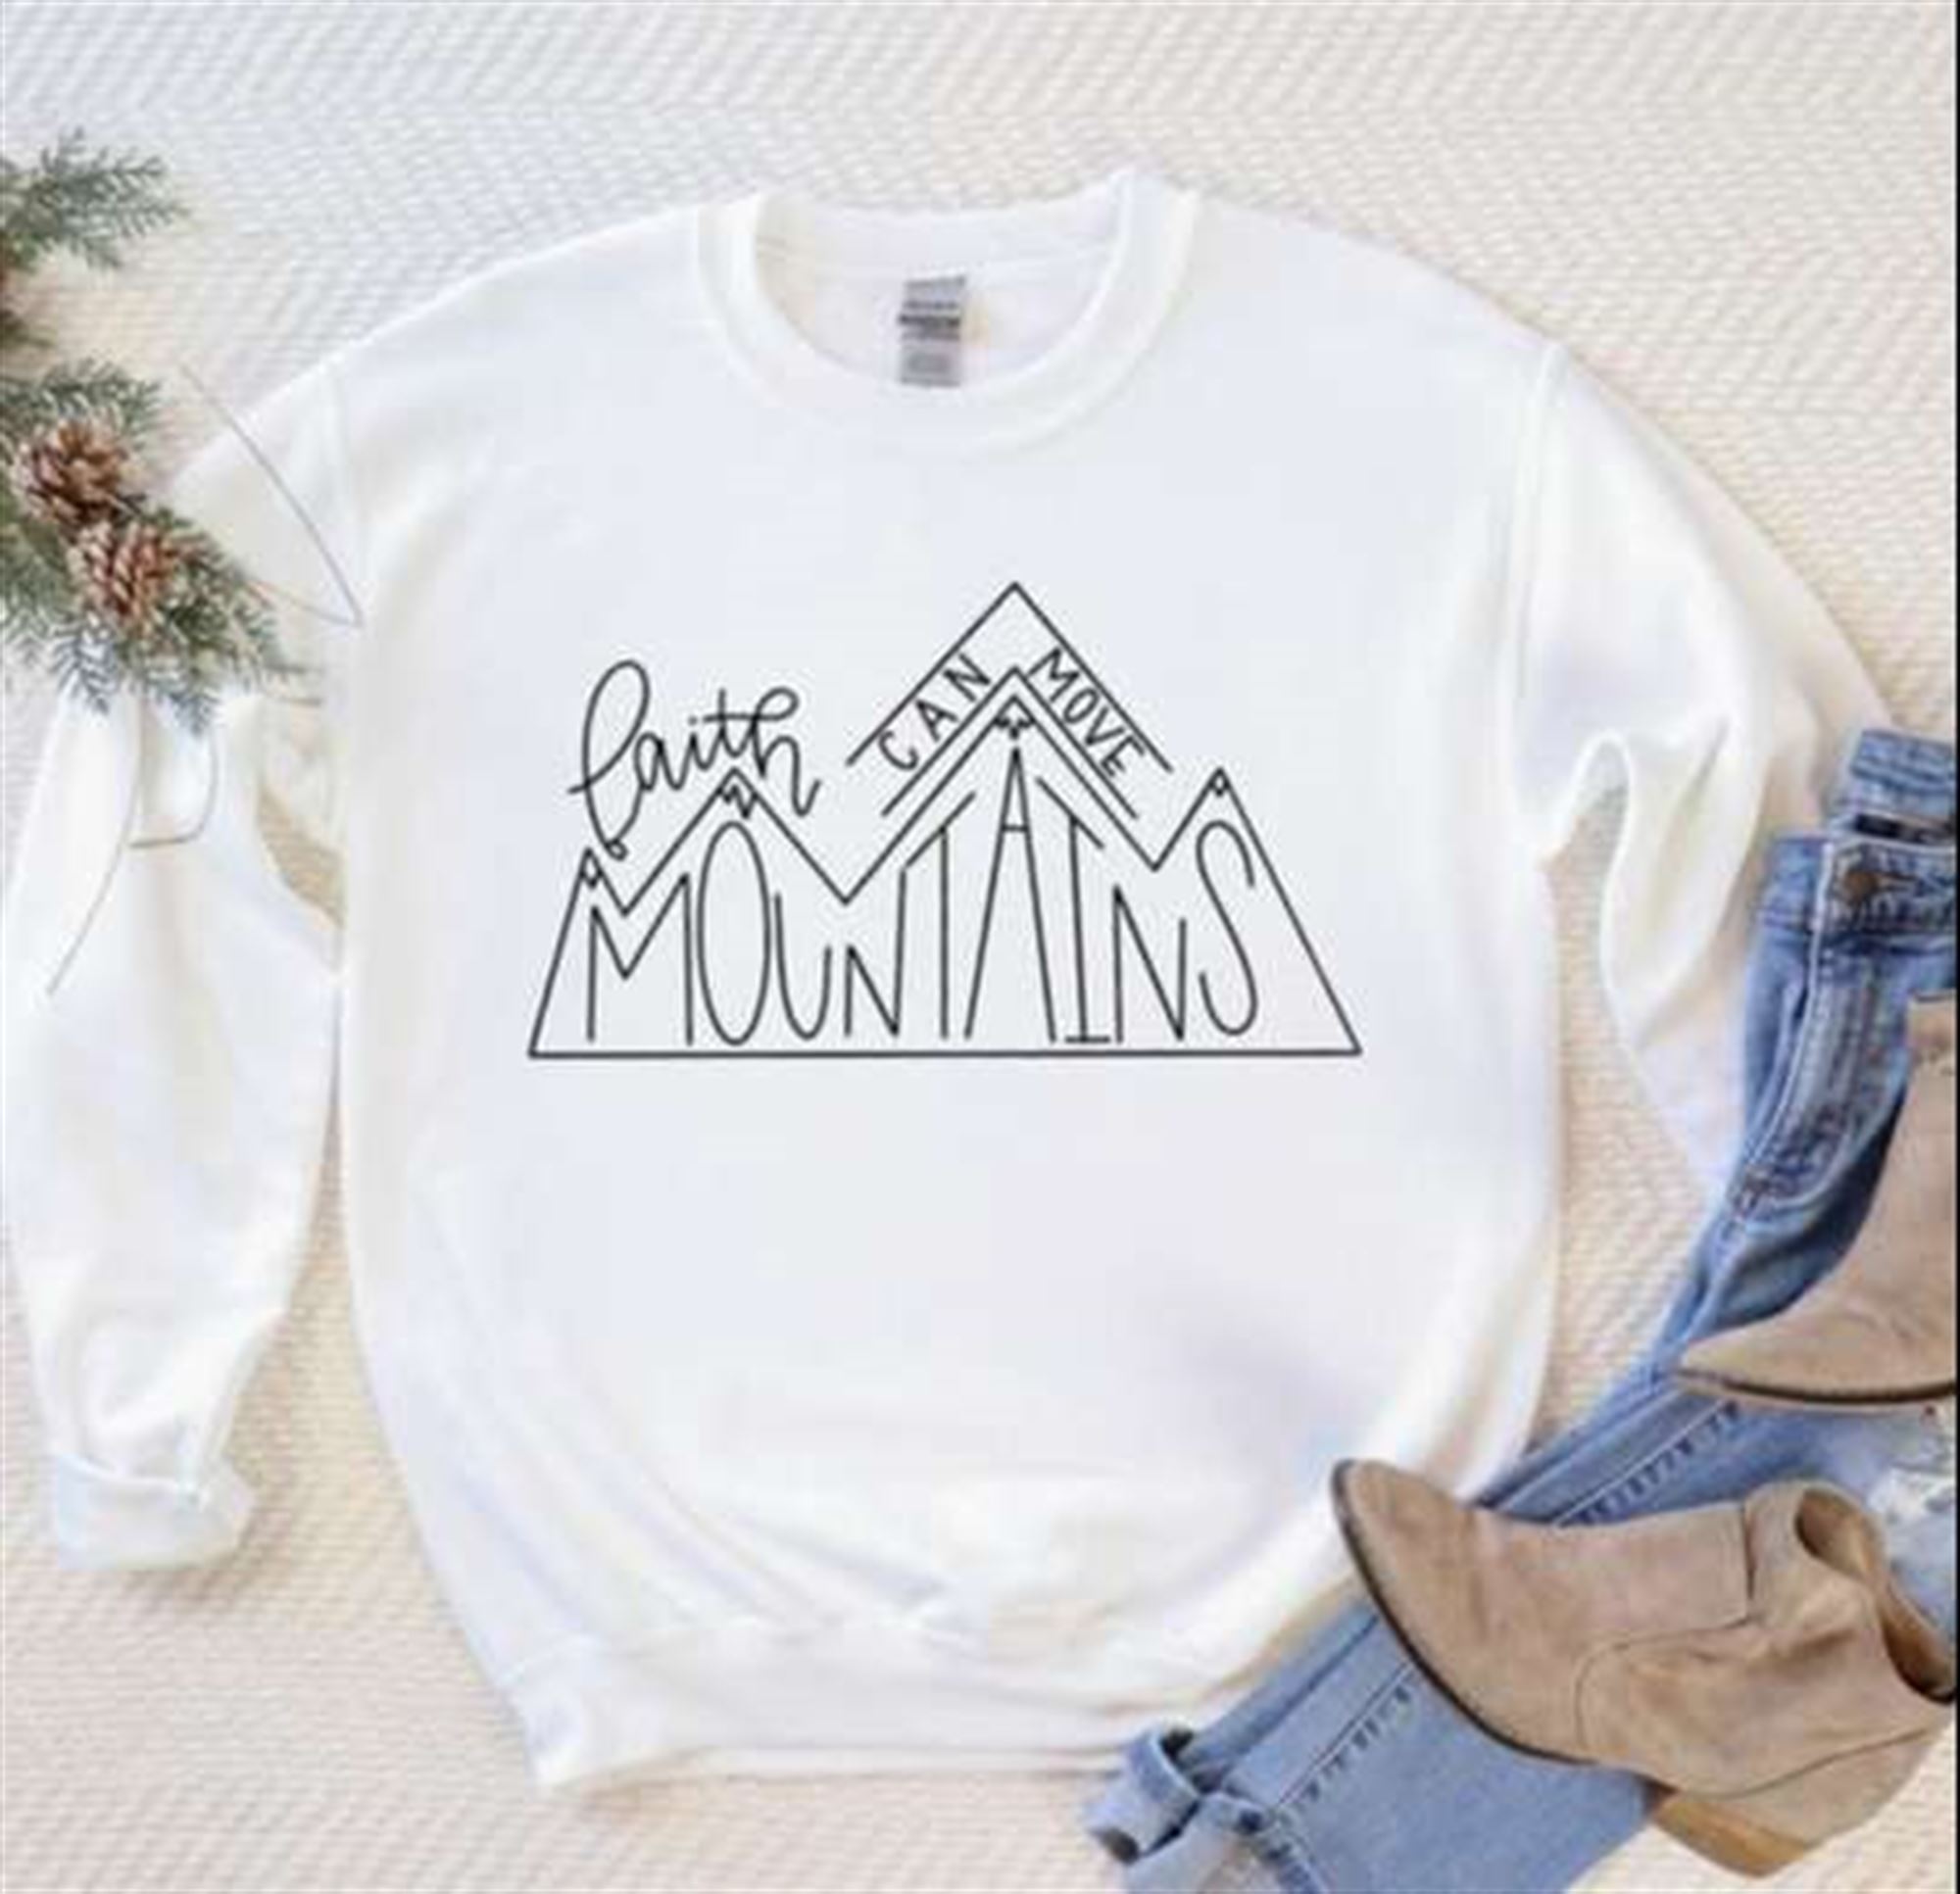 Faith Can Move Mountains Sweatshirt T Shirt Full Size Up To 5xl